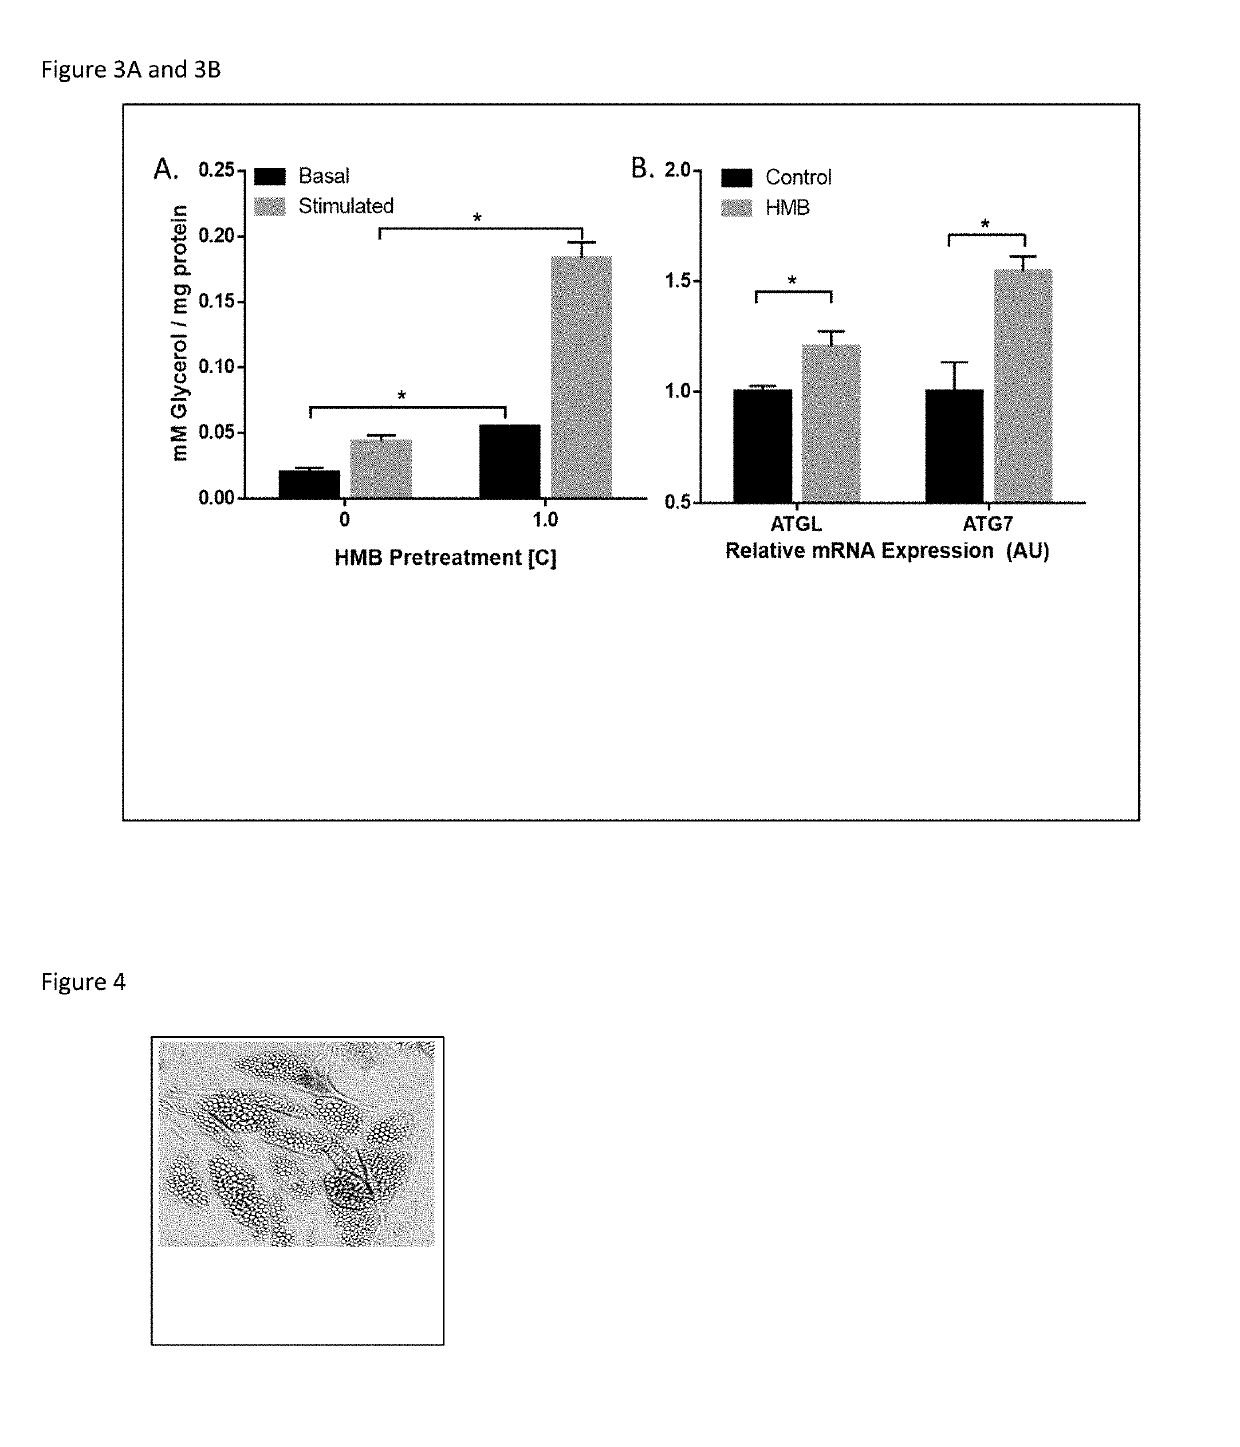 Compositions and Methods of Use of Beta-Hydroxy-Beta-Methylbutyrate (HMB) FOR MODULATING AUTOPHAGY AND LIPOPHAGY